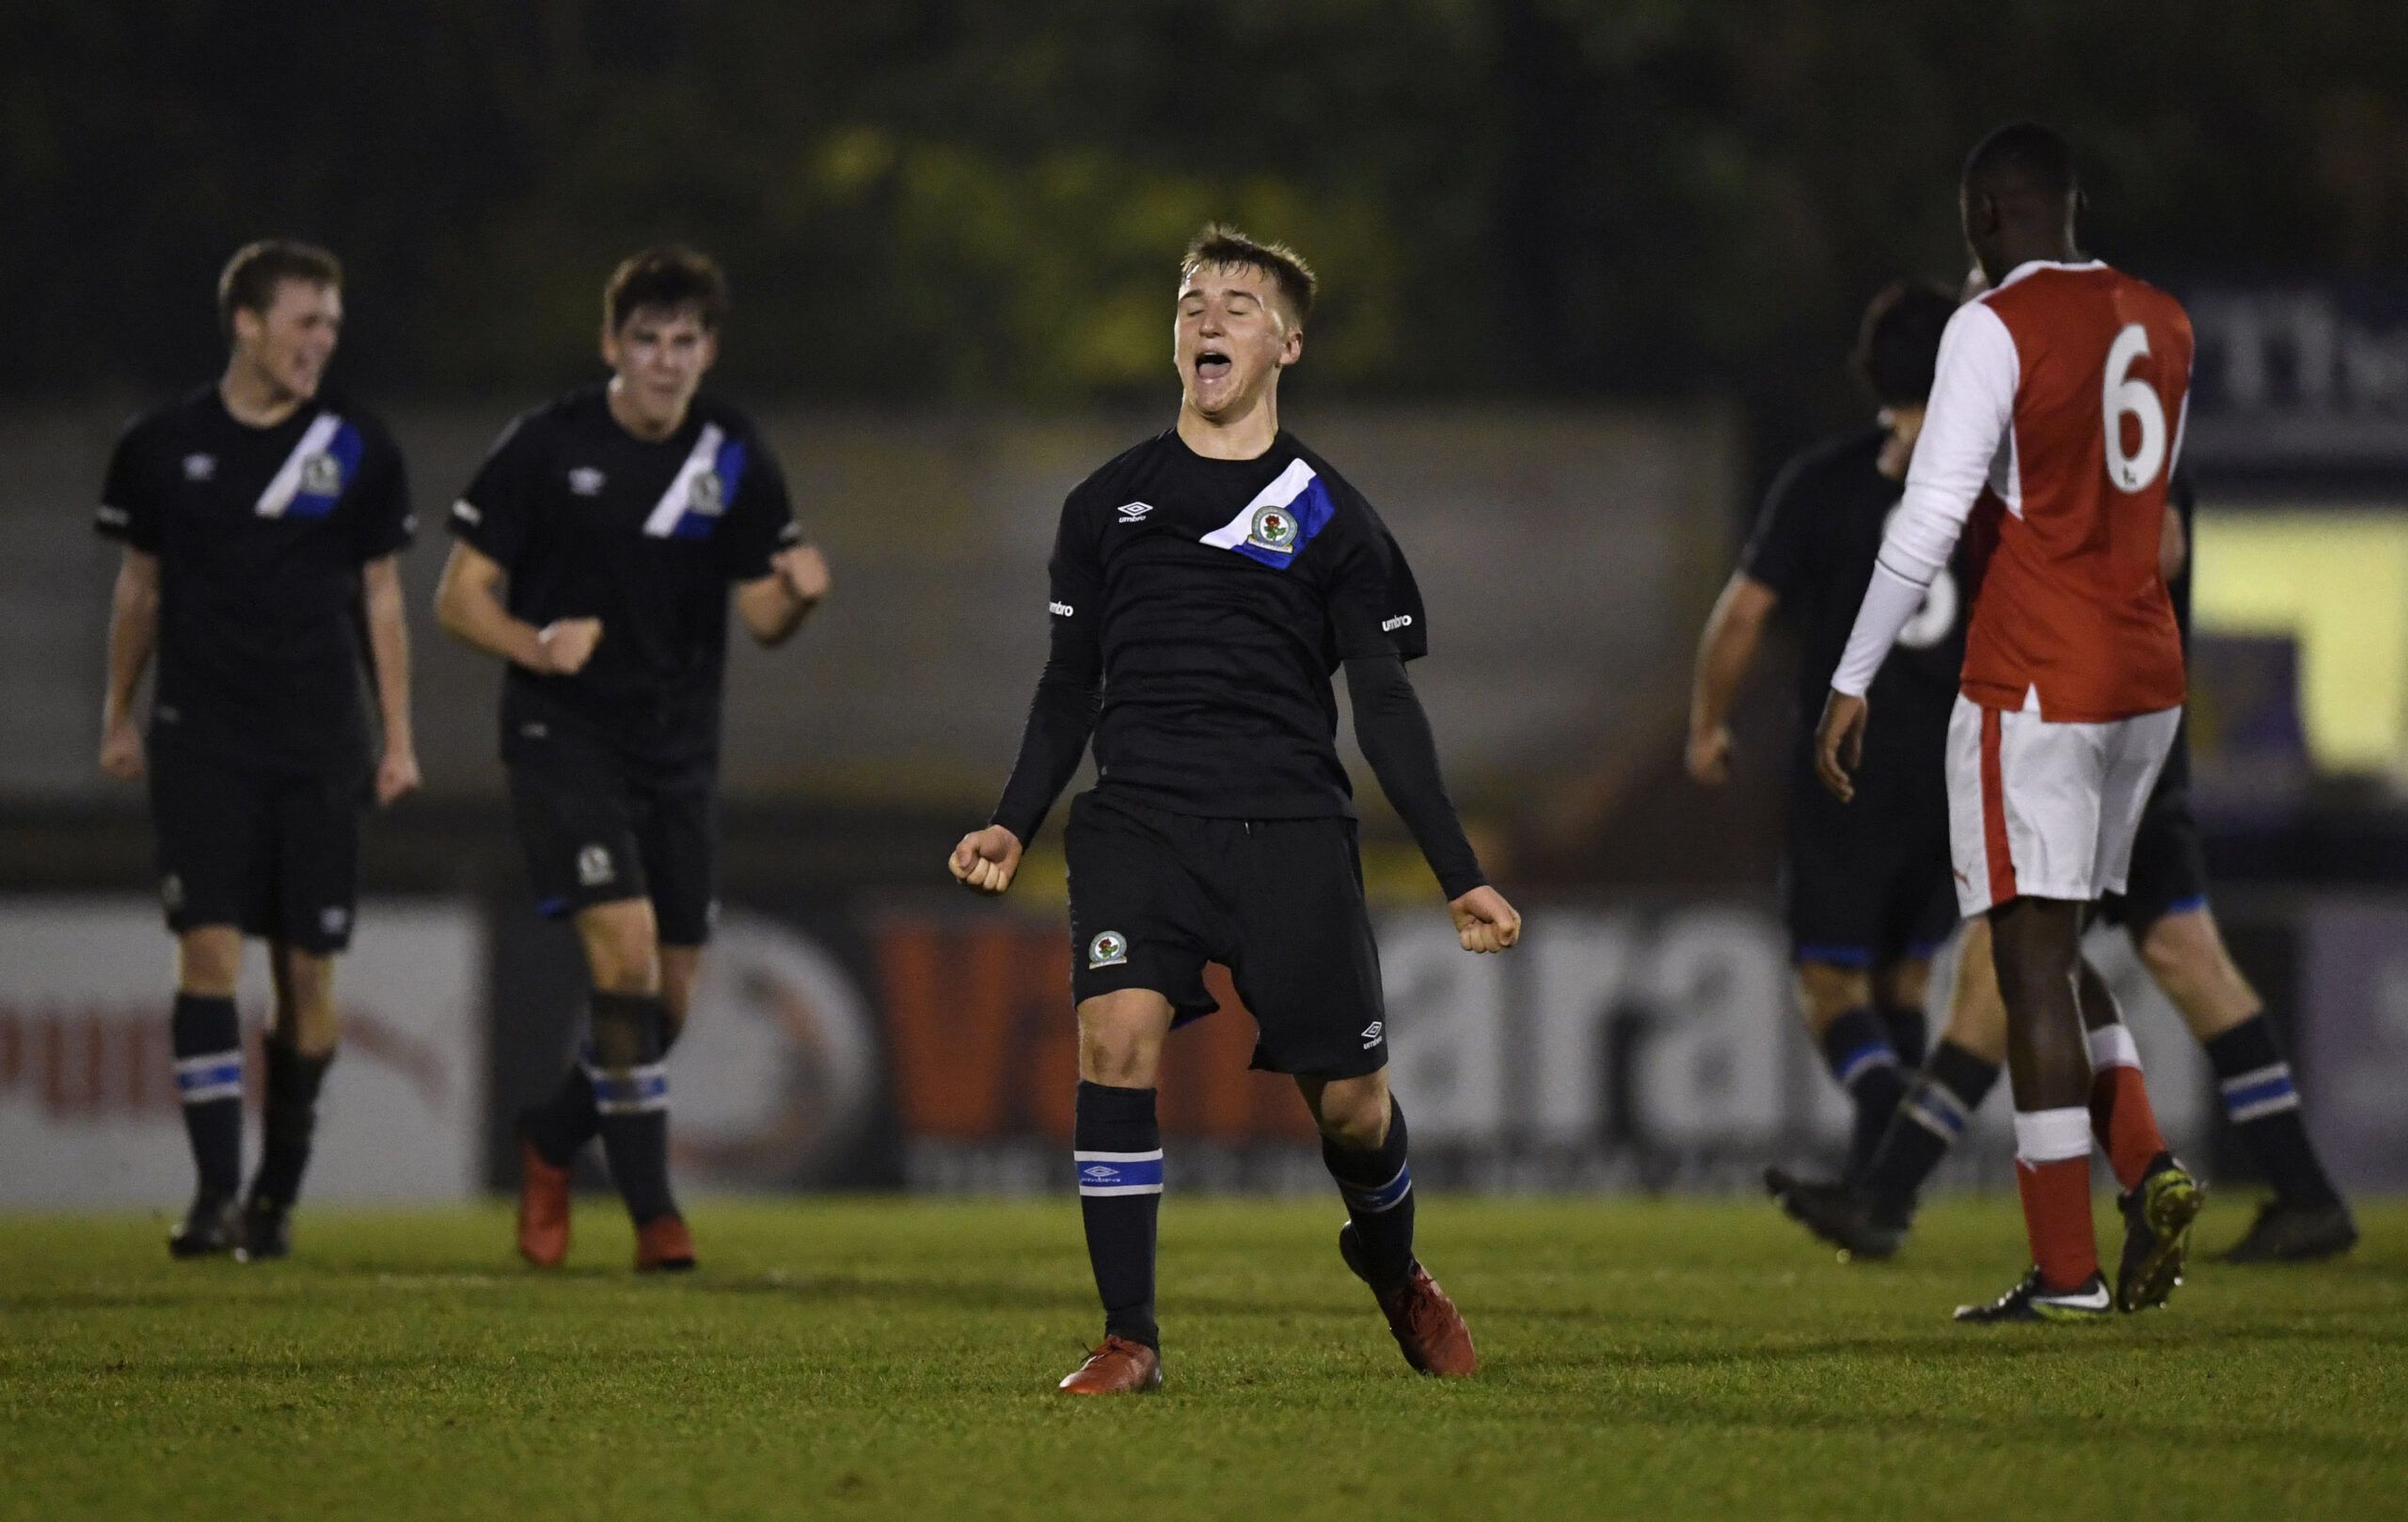 Britain Football Soccer - Arsenal v Blackburn Rovers - FA Youth Cup Third Round - Meadow Park, Boreham Wood - 16/12/16 Blackburn's Daniel Butterworth celebrates after the match  Mandatory Credit: Action Images / Tony O'Brien Livepic EDITORIAL USE ONLY.